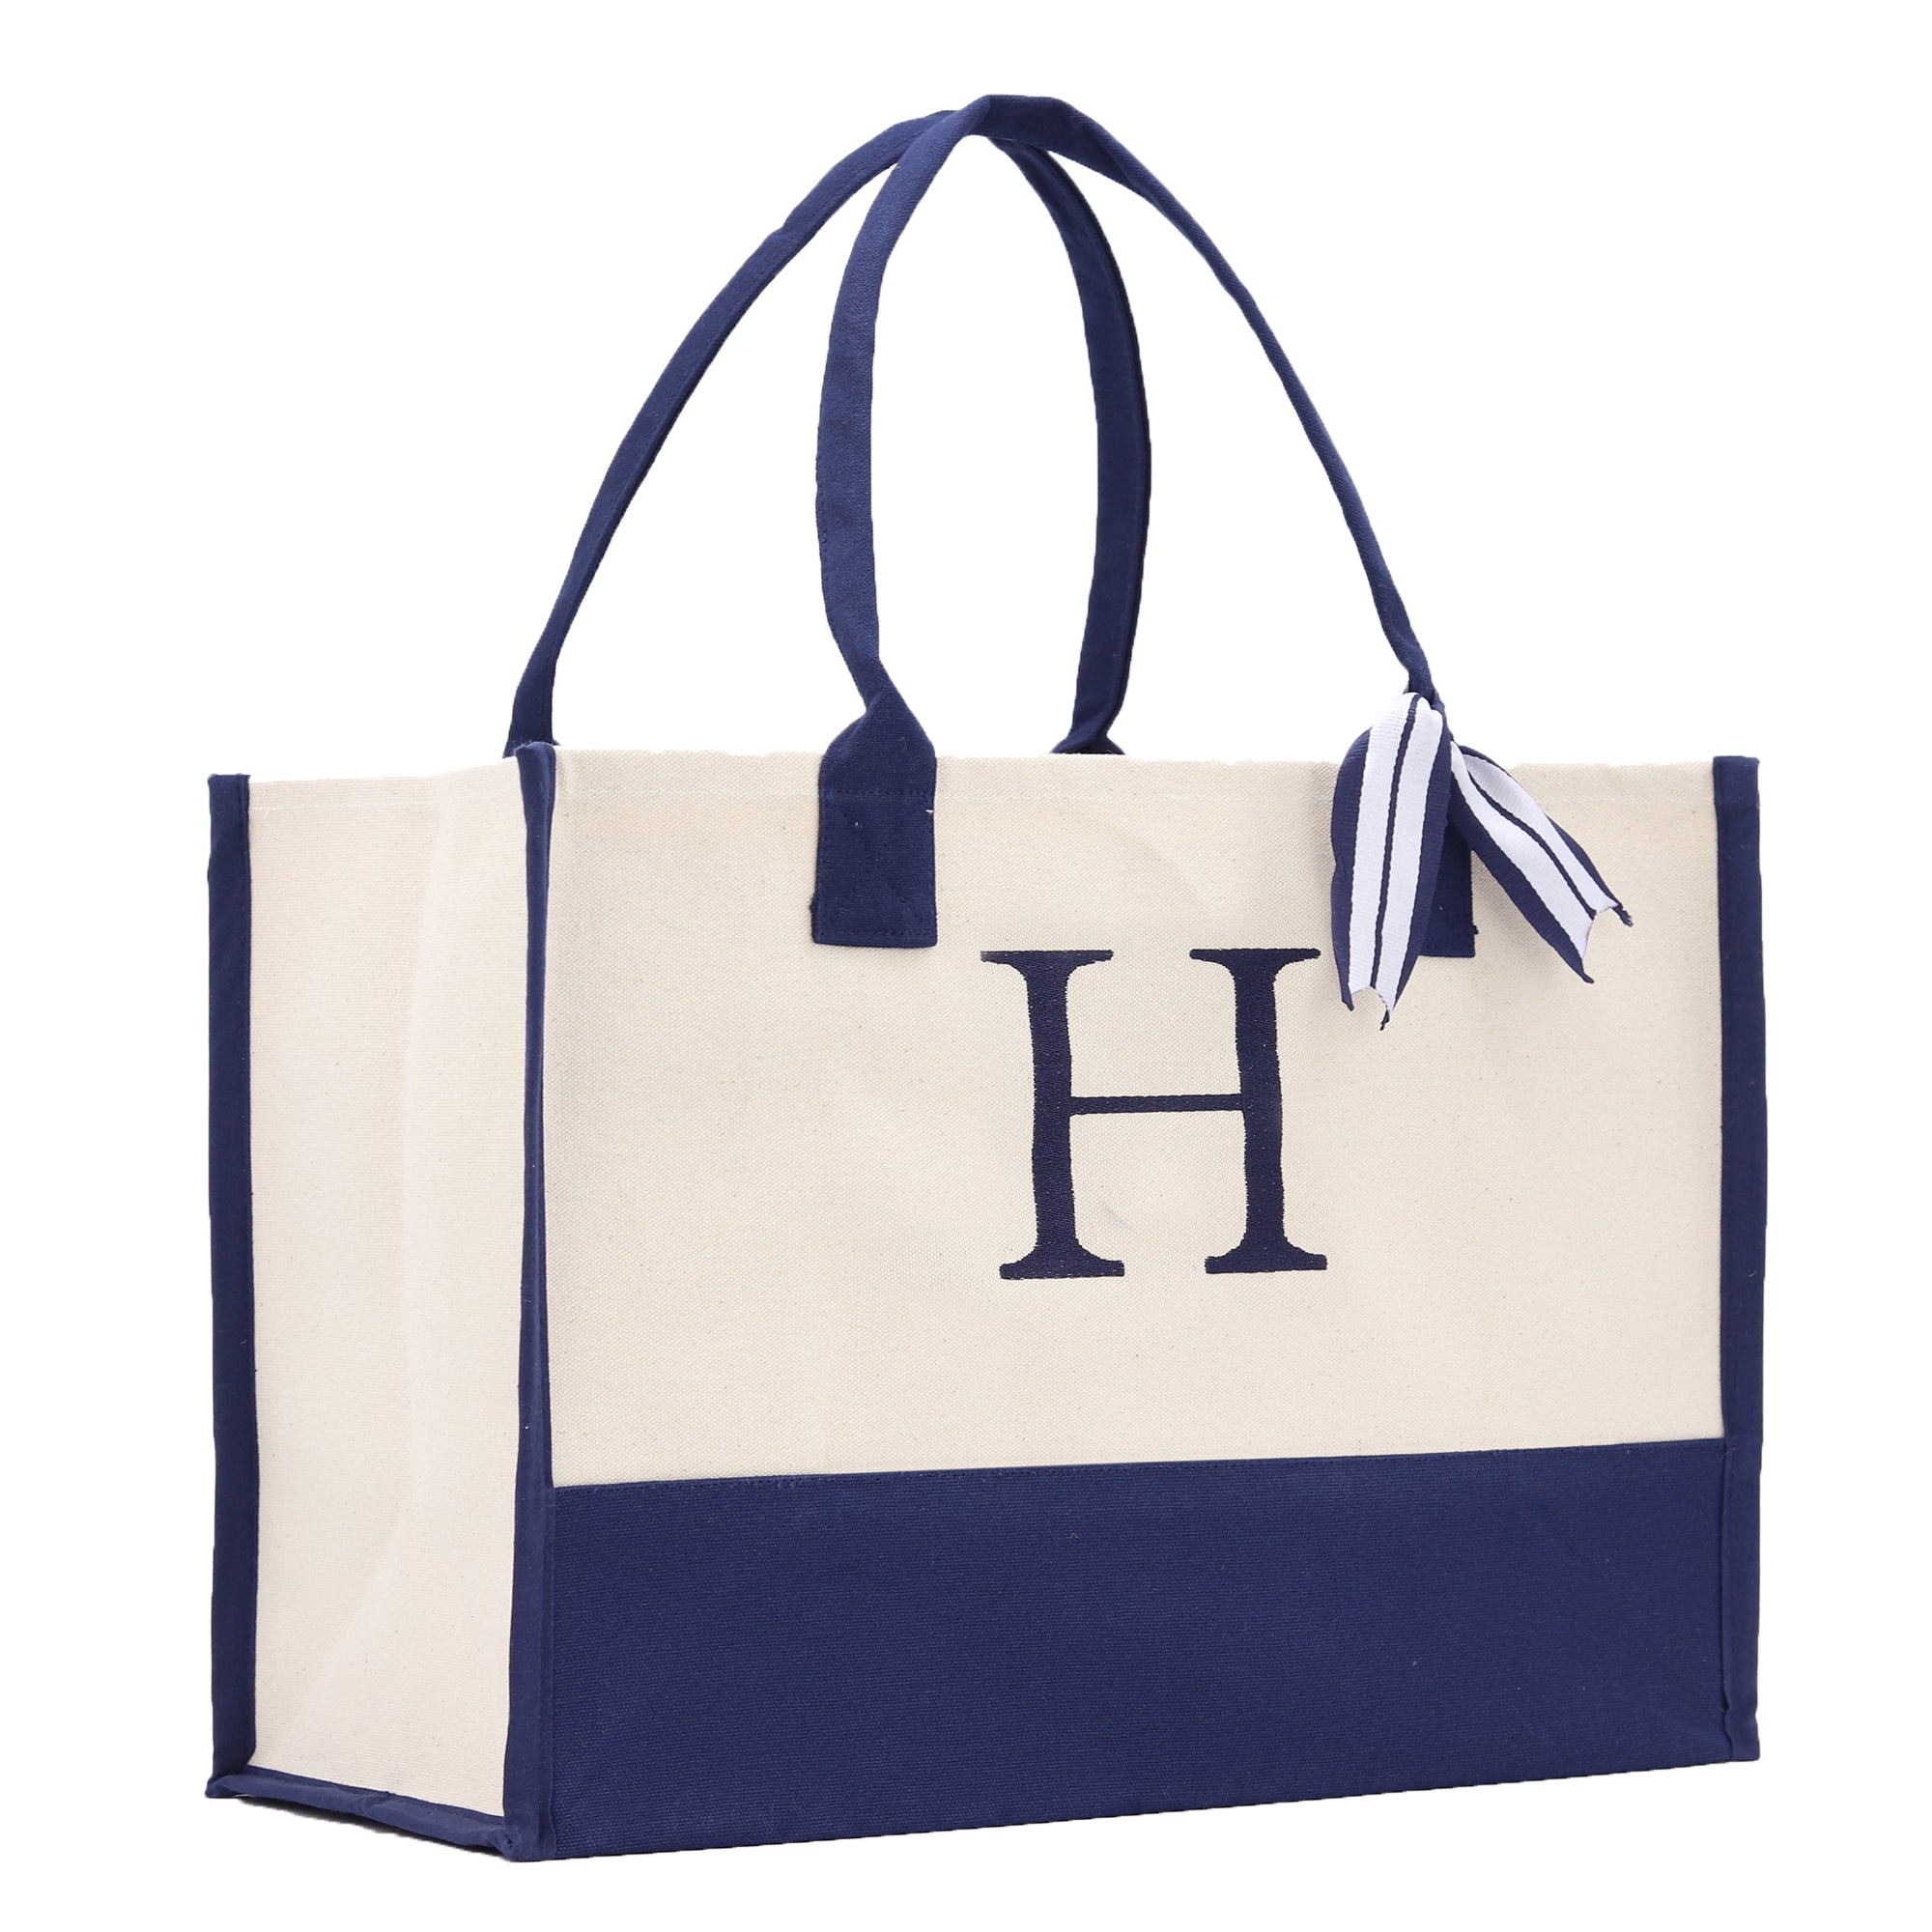 Monogram Tote Bag with 100% Cotton Canvas and a Chic Personalized Monogram Navy Blue Vanessa Rosella Block H 